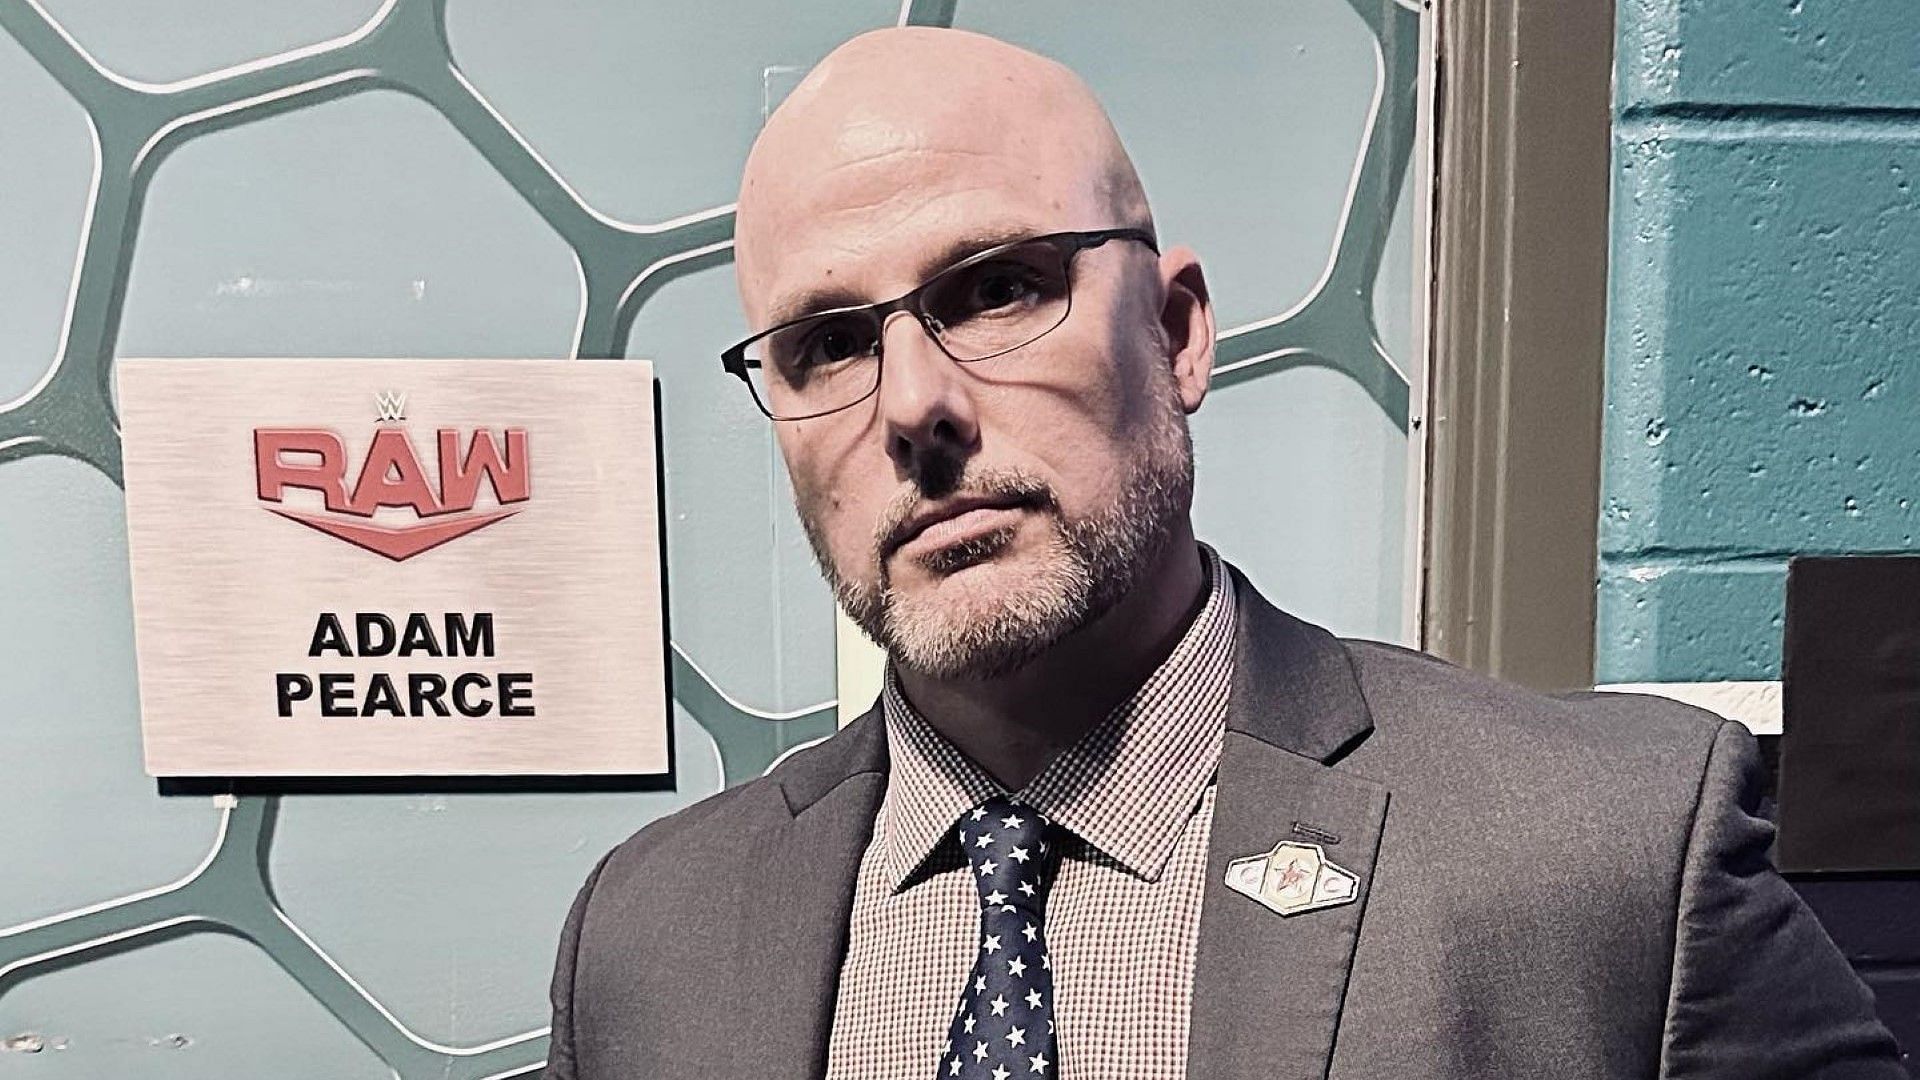 WWE RAW General Manager Adam Pearce waits outside of his backstage office